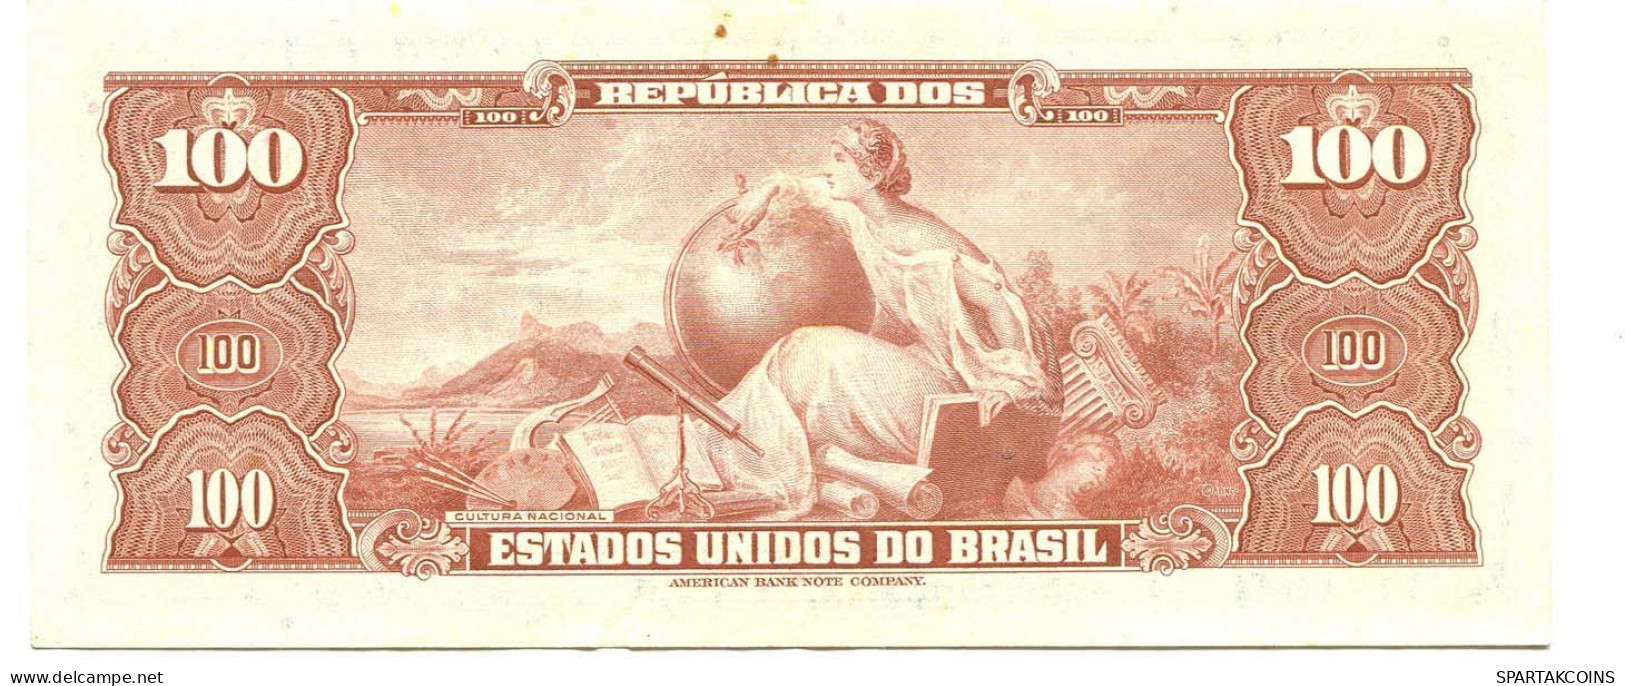 BRASIL 100 CRUZEIROS 1961 SERIE 530A Paper Money Banknote #P10848.4 - [11] Local Banknote Issues